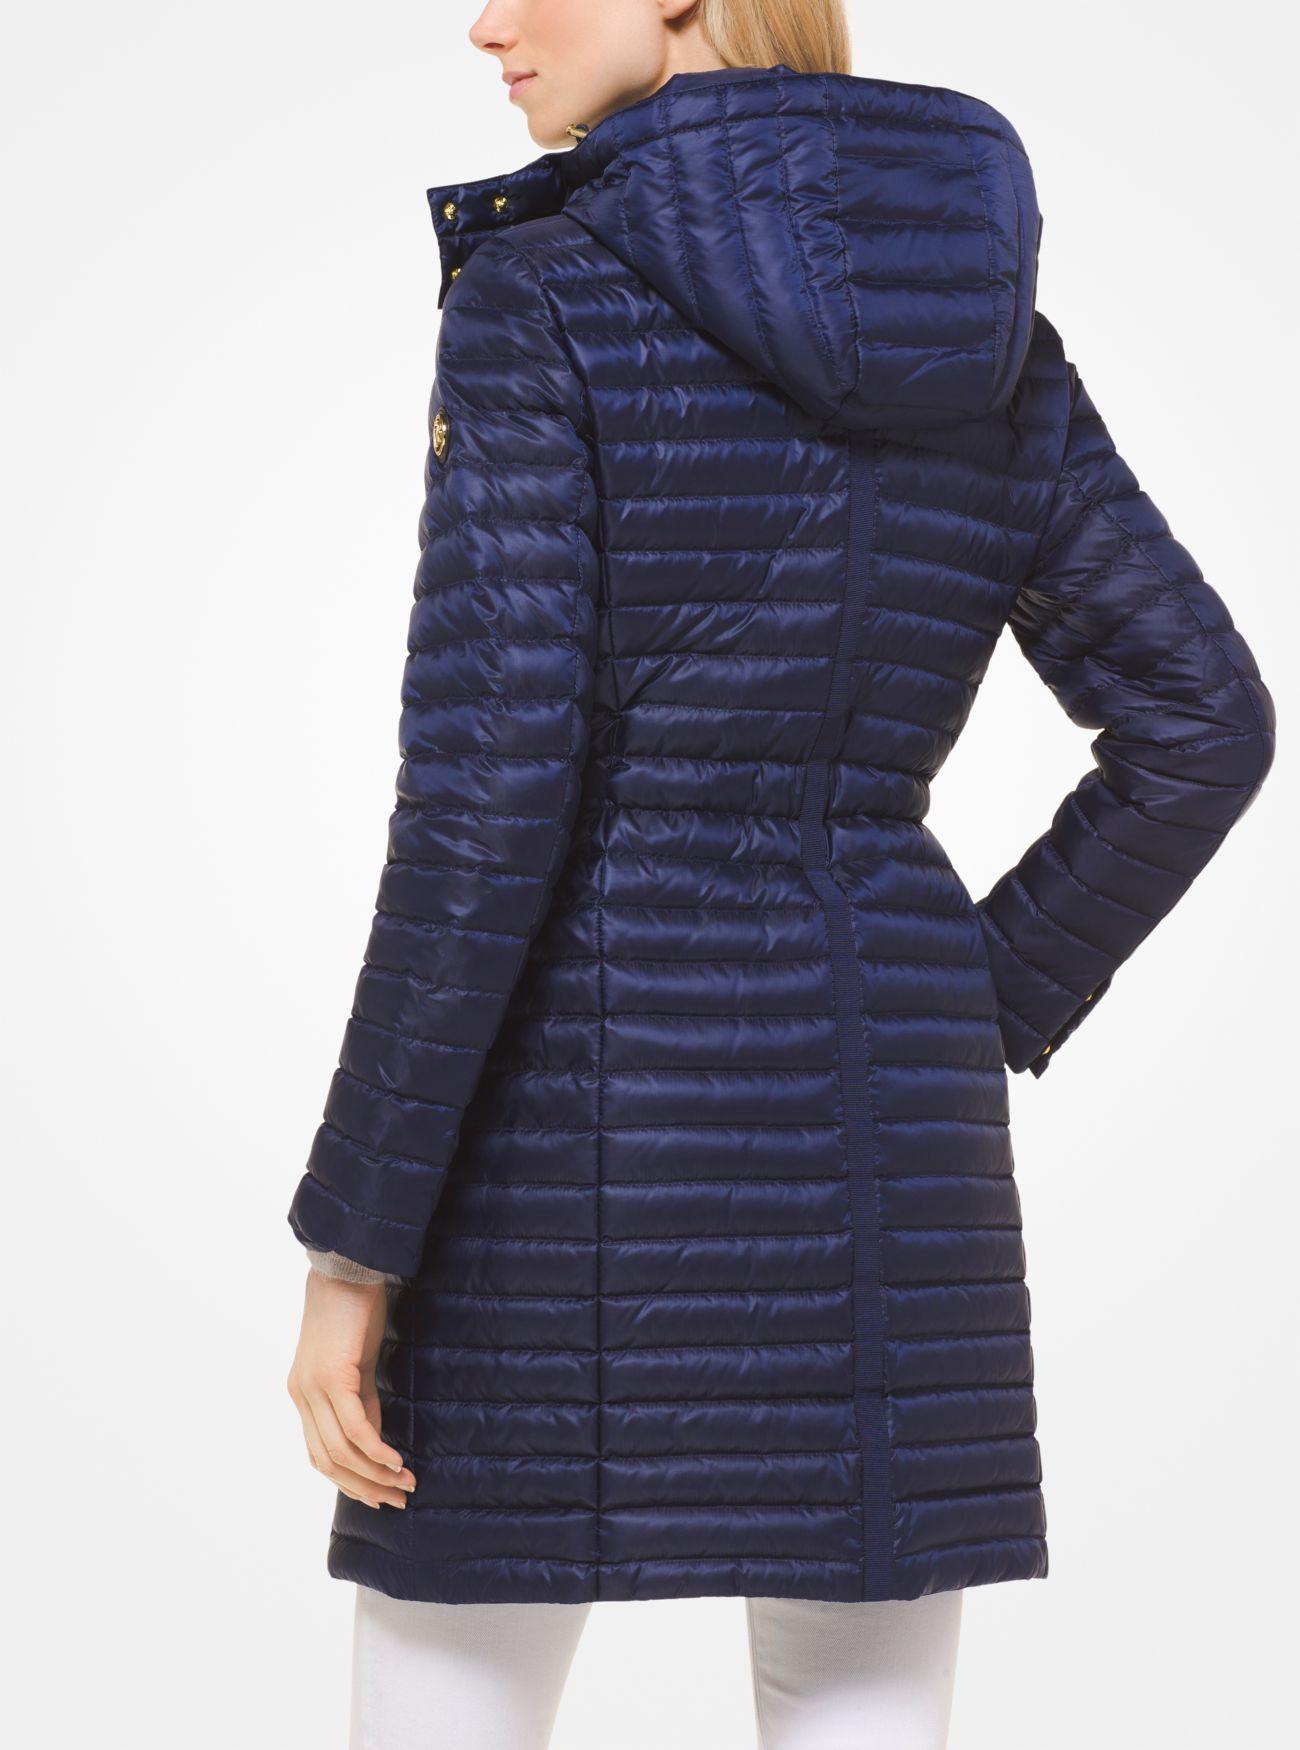 Michael Kors Quilted Satin Puffer Coat 